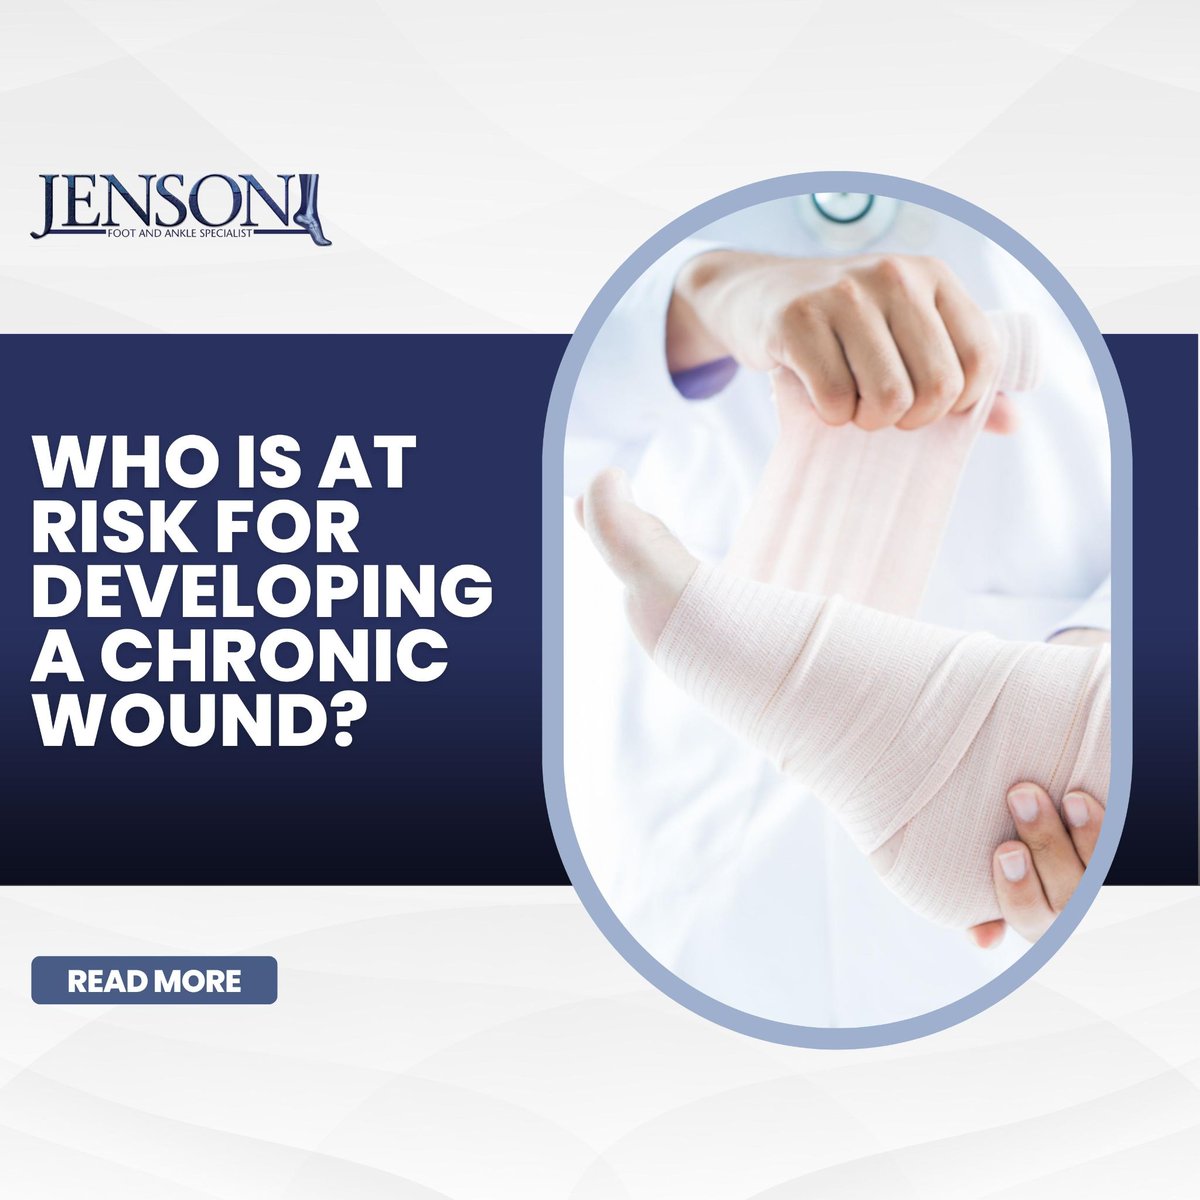 Our bodies are designed to heal themselves, but there are some people who are naturally at risk of developing a chronic wound. 
------
🌐 profootcenter.com
.
#chronicwounds #woundcare #chronicwound #wound #wounds #woundcenter #woundcarecenter #woundclinic #woundtreatment